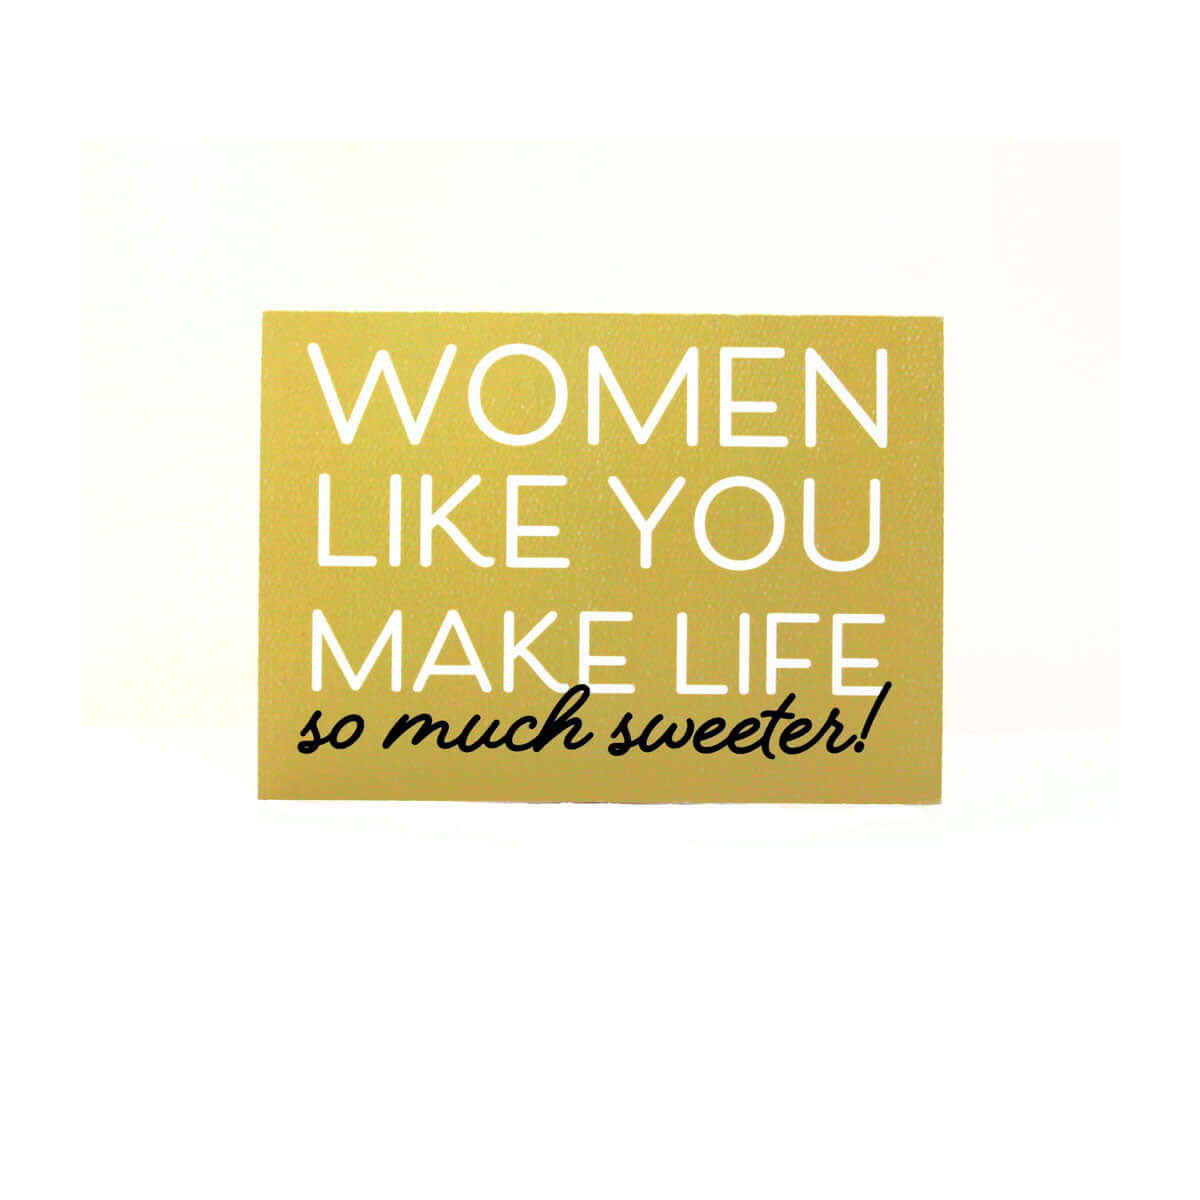 yellow horizontal "Women Like you card" that reads "Women like you make life so much sweeter!" in white and black text